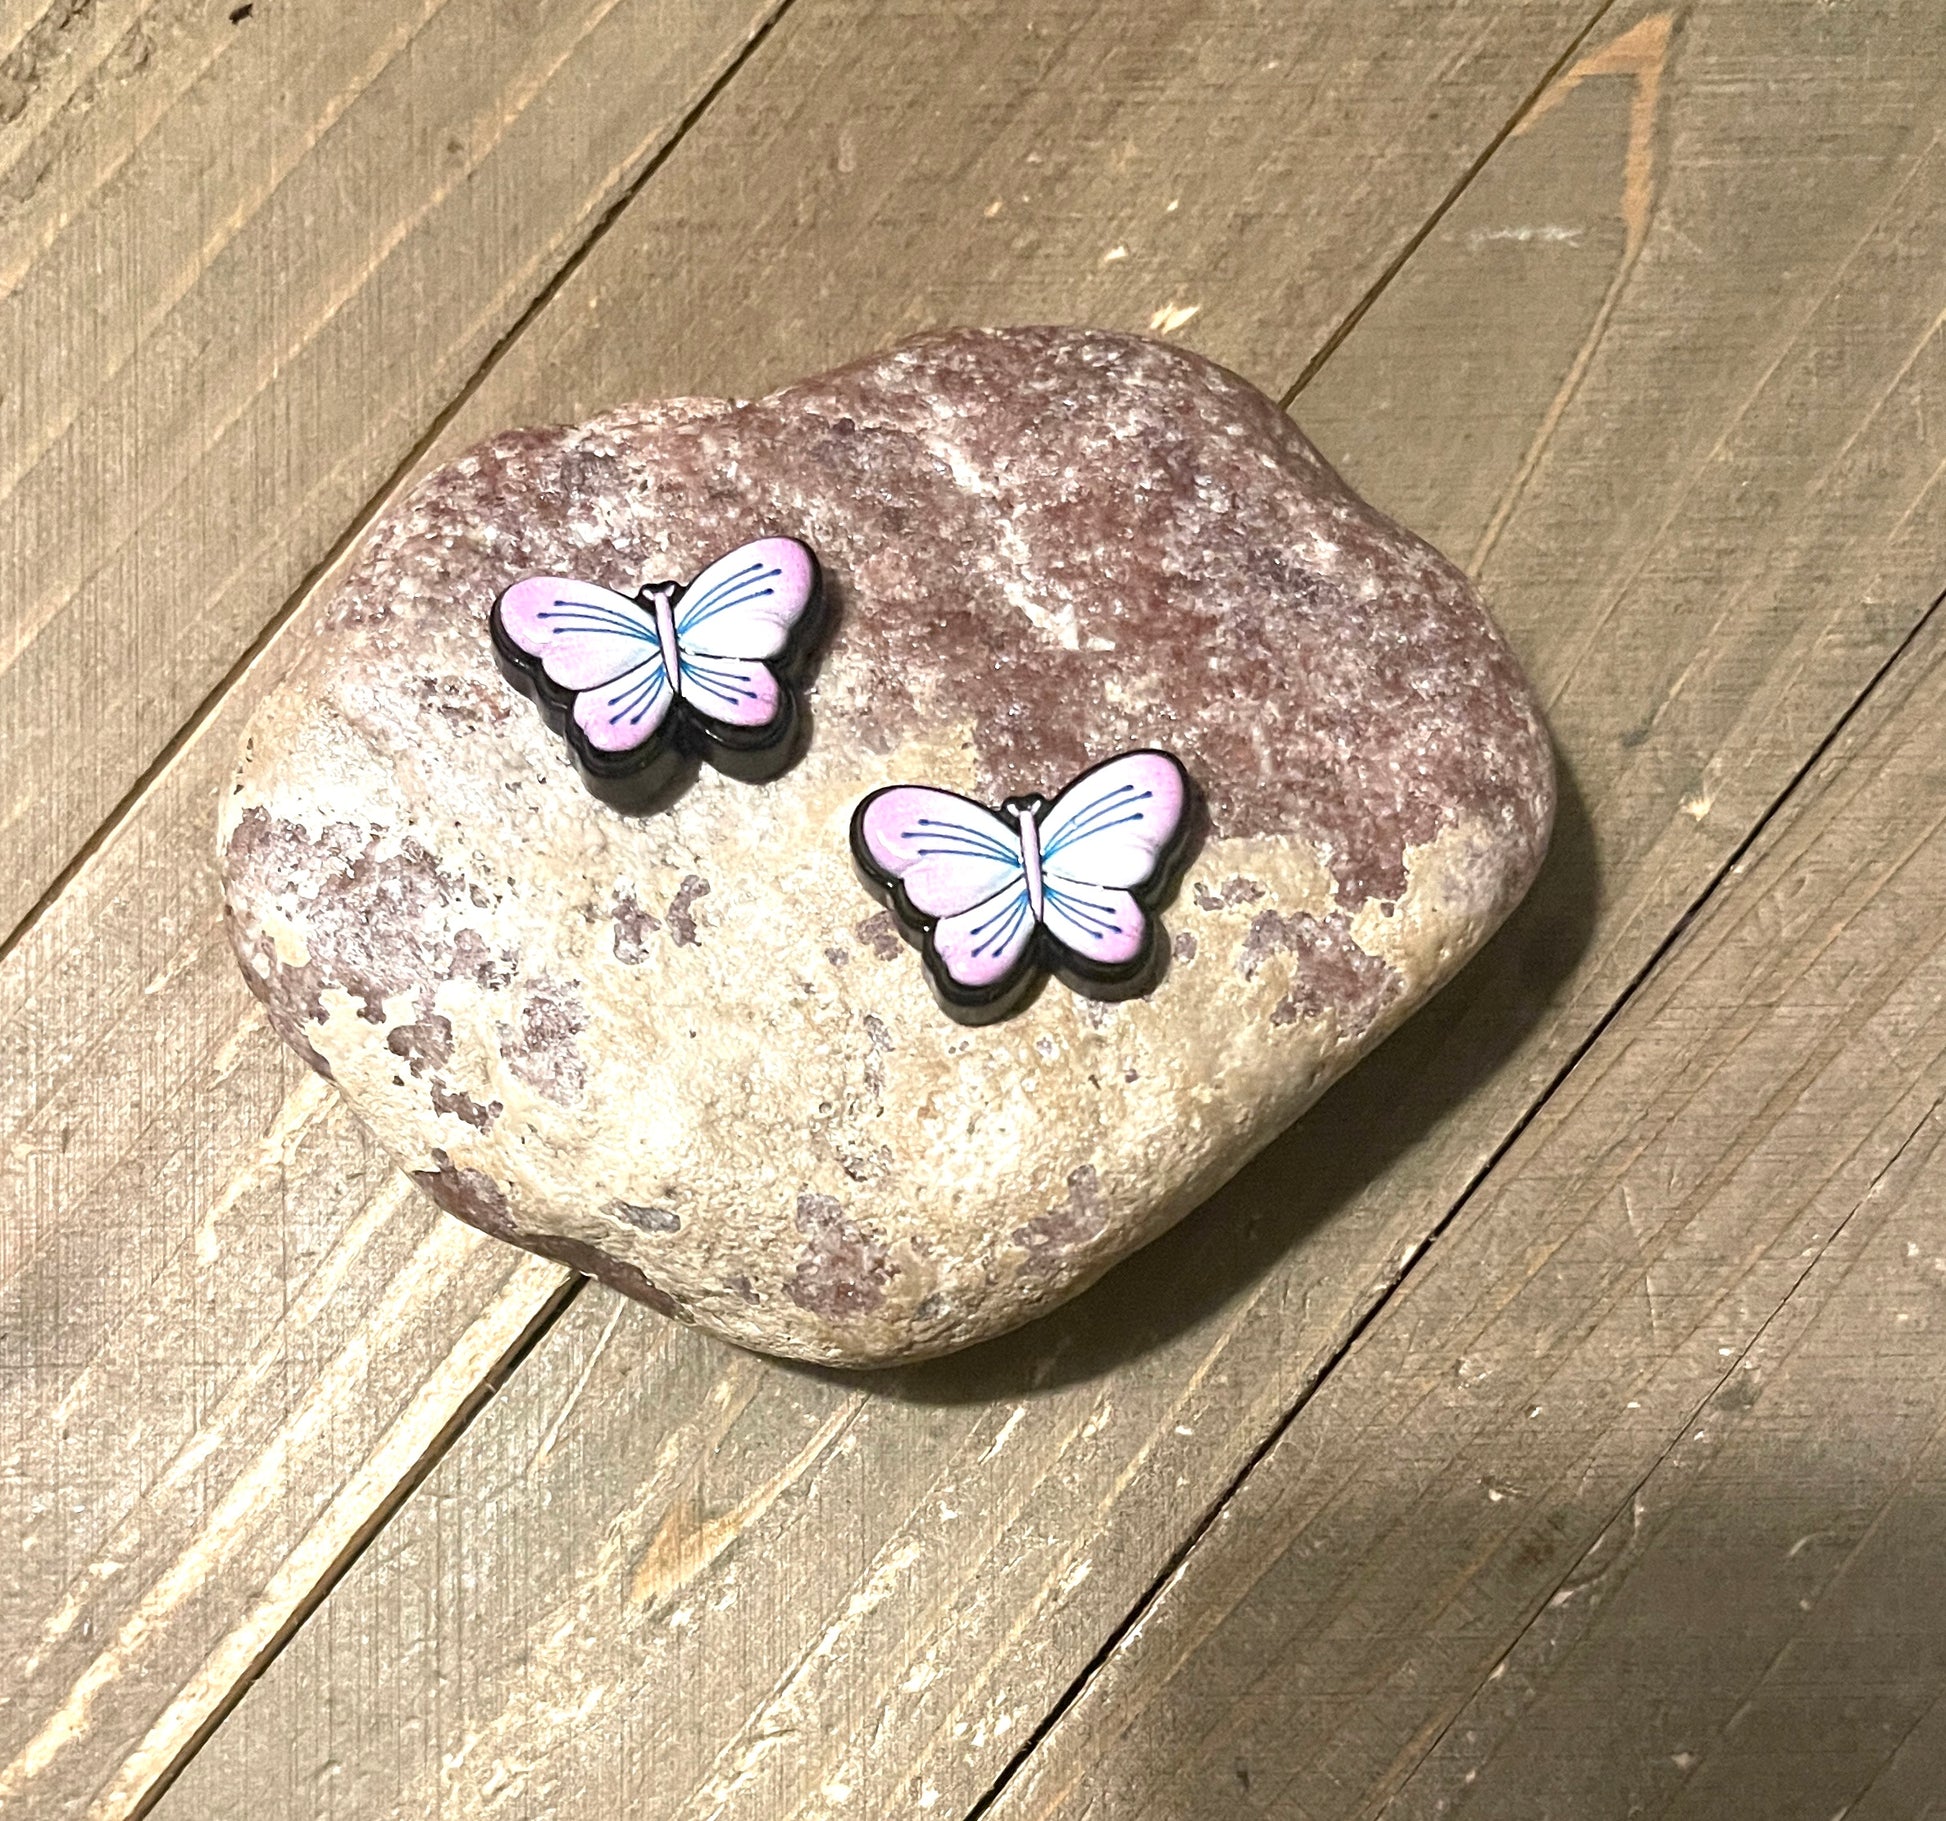 Vibrant Purple, outline in black Butterfly EarringsPink tiful of LOVE